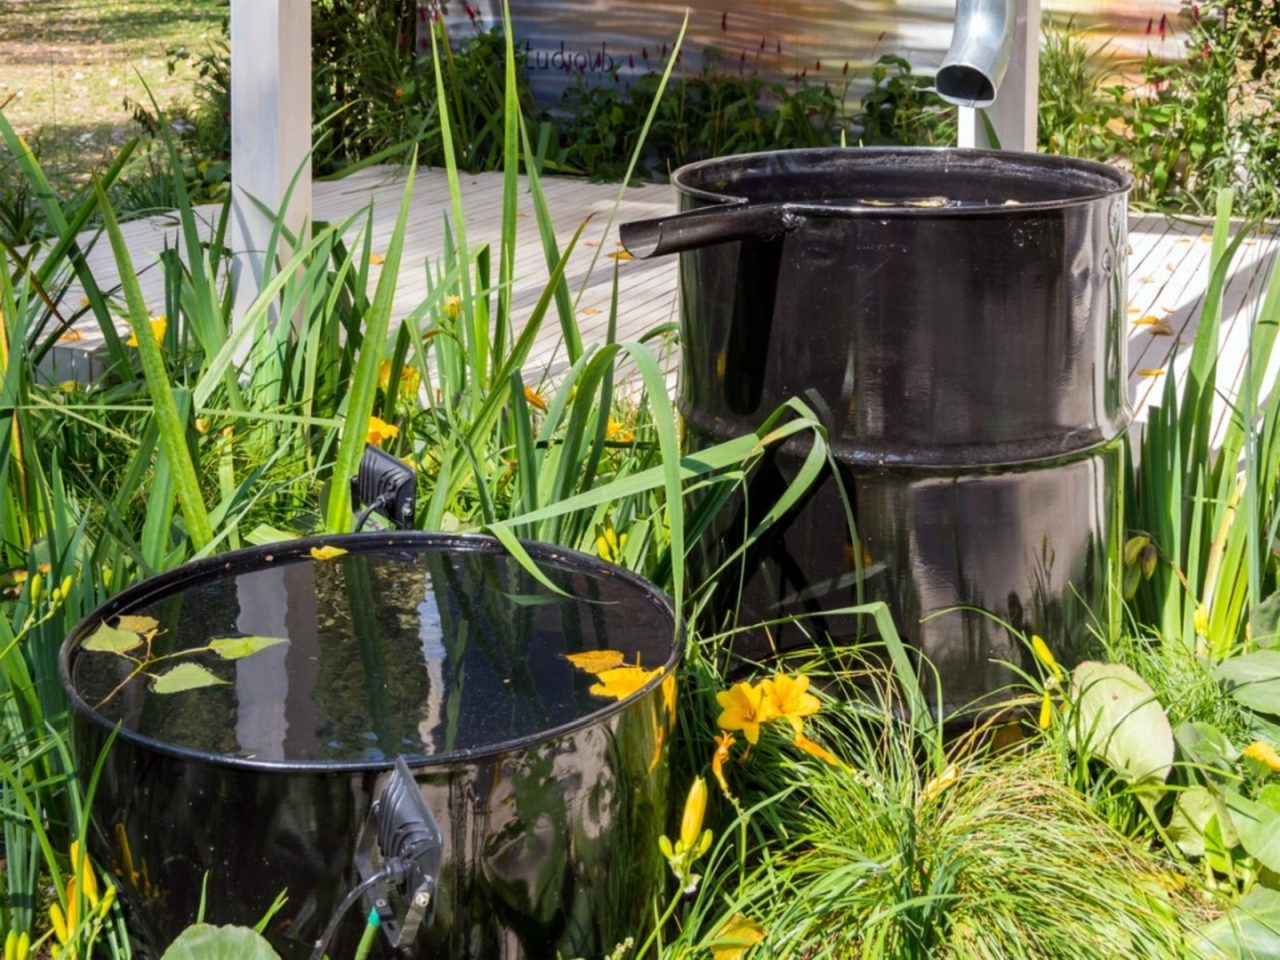 How to Conserve Water at Home - Harvest Rainwater